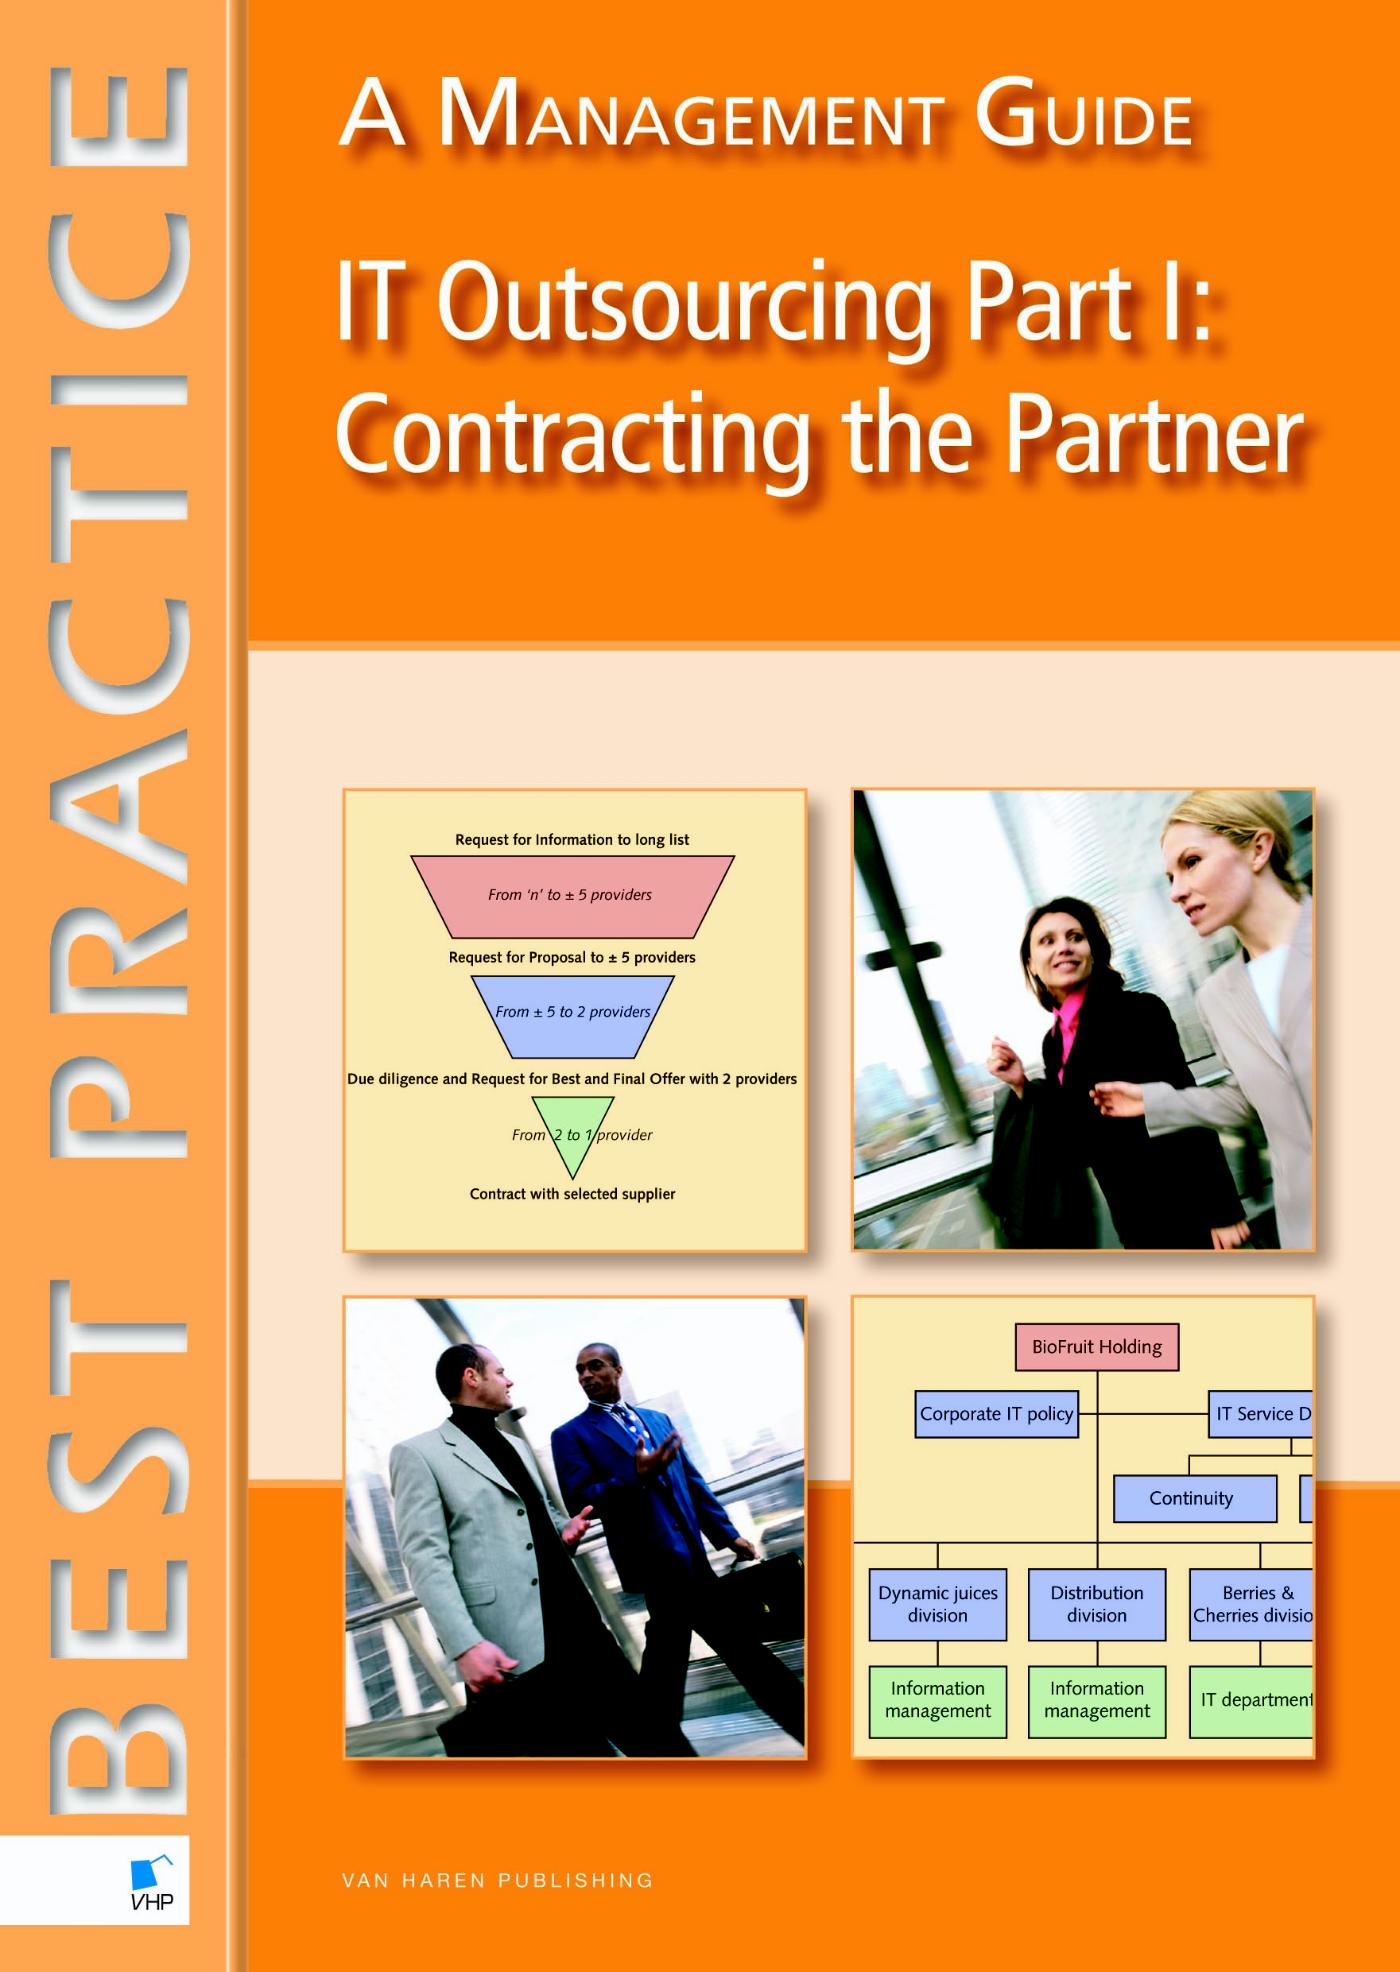 IT Outsourcing / 1 Contracting the Partner / deel a management guide